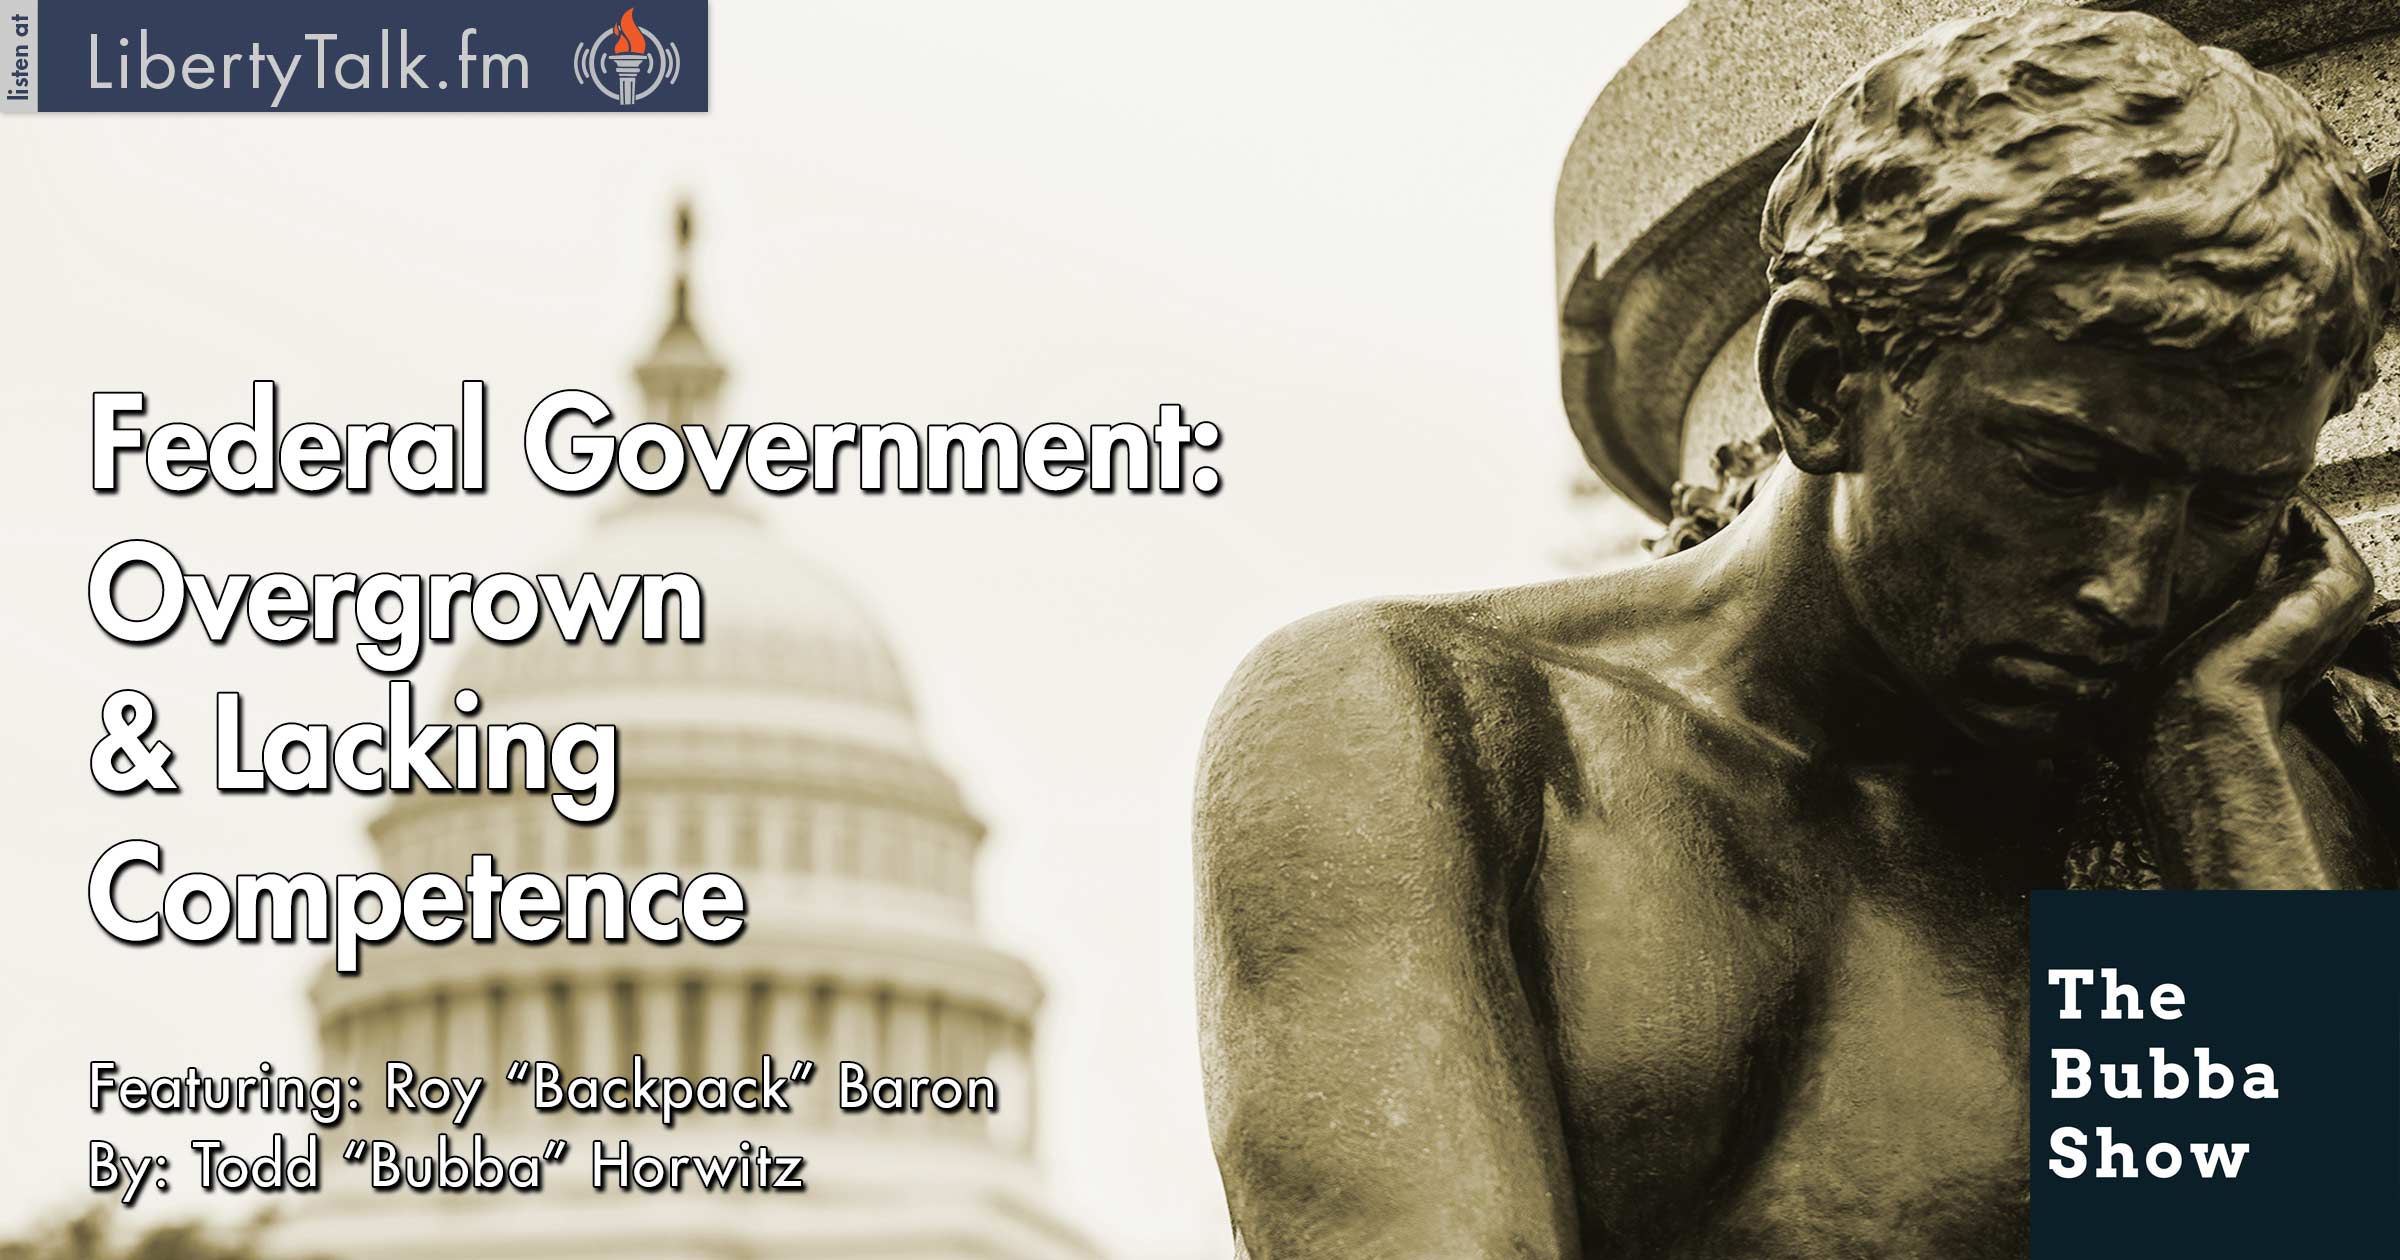 Federal Government: Overgrown & Lacking Competence - The Bubba Show